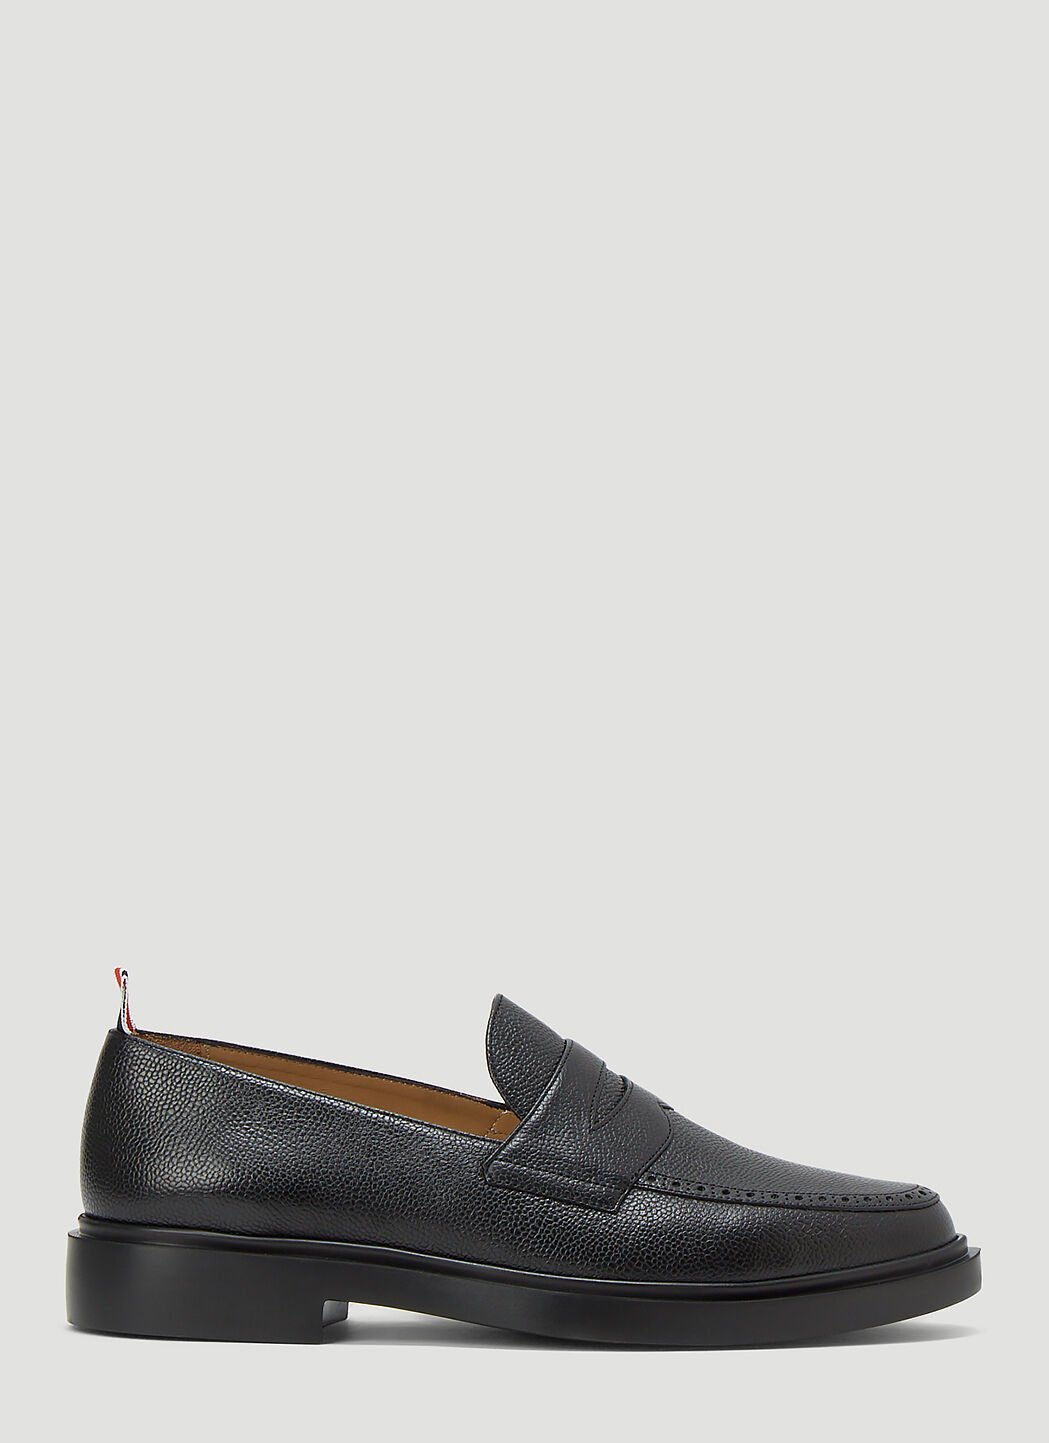 Thom Browne Slip-On Loafers Navy thb0129004